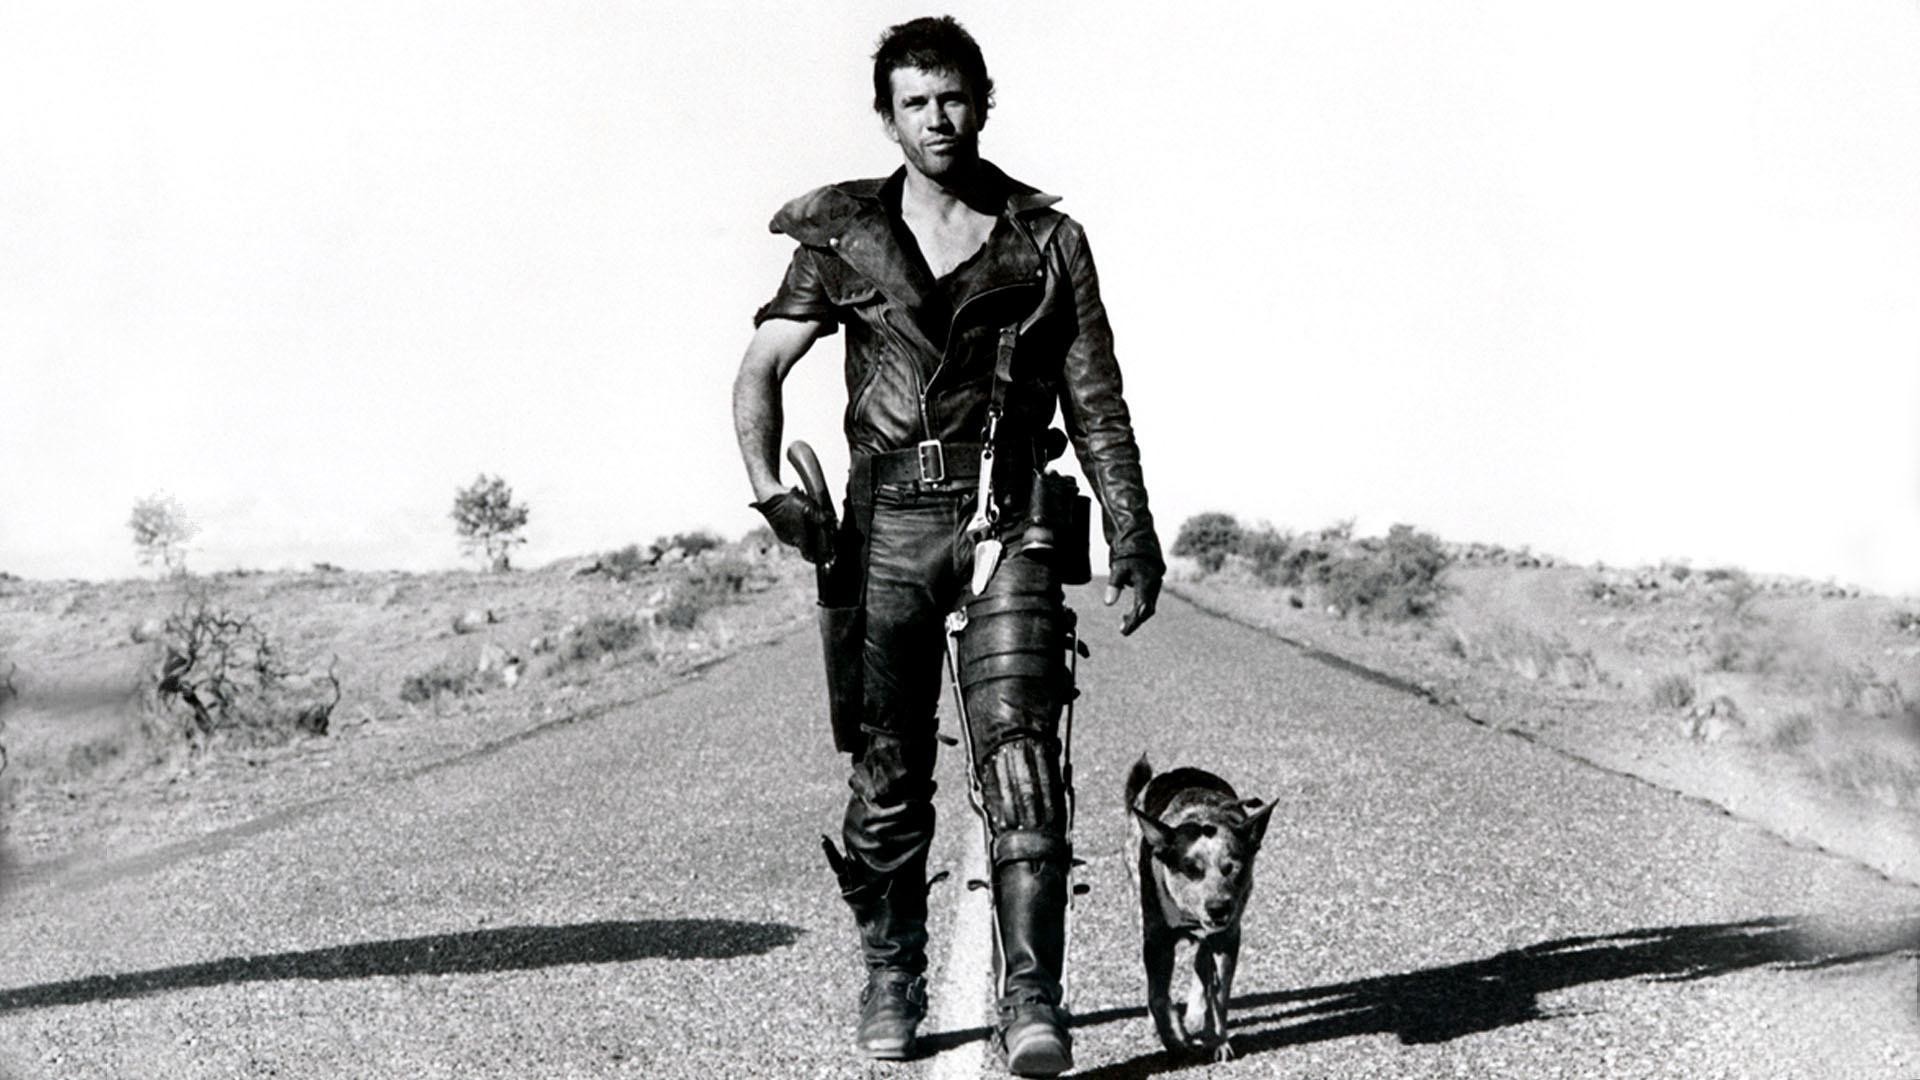 Lately, I've been thinking about Mad Max a lot.